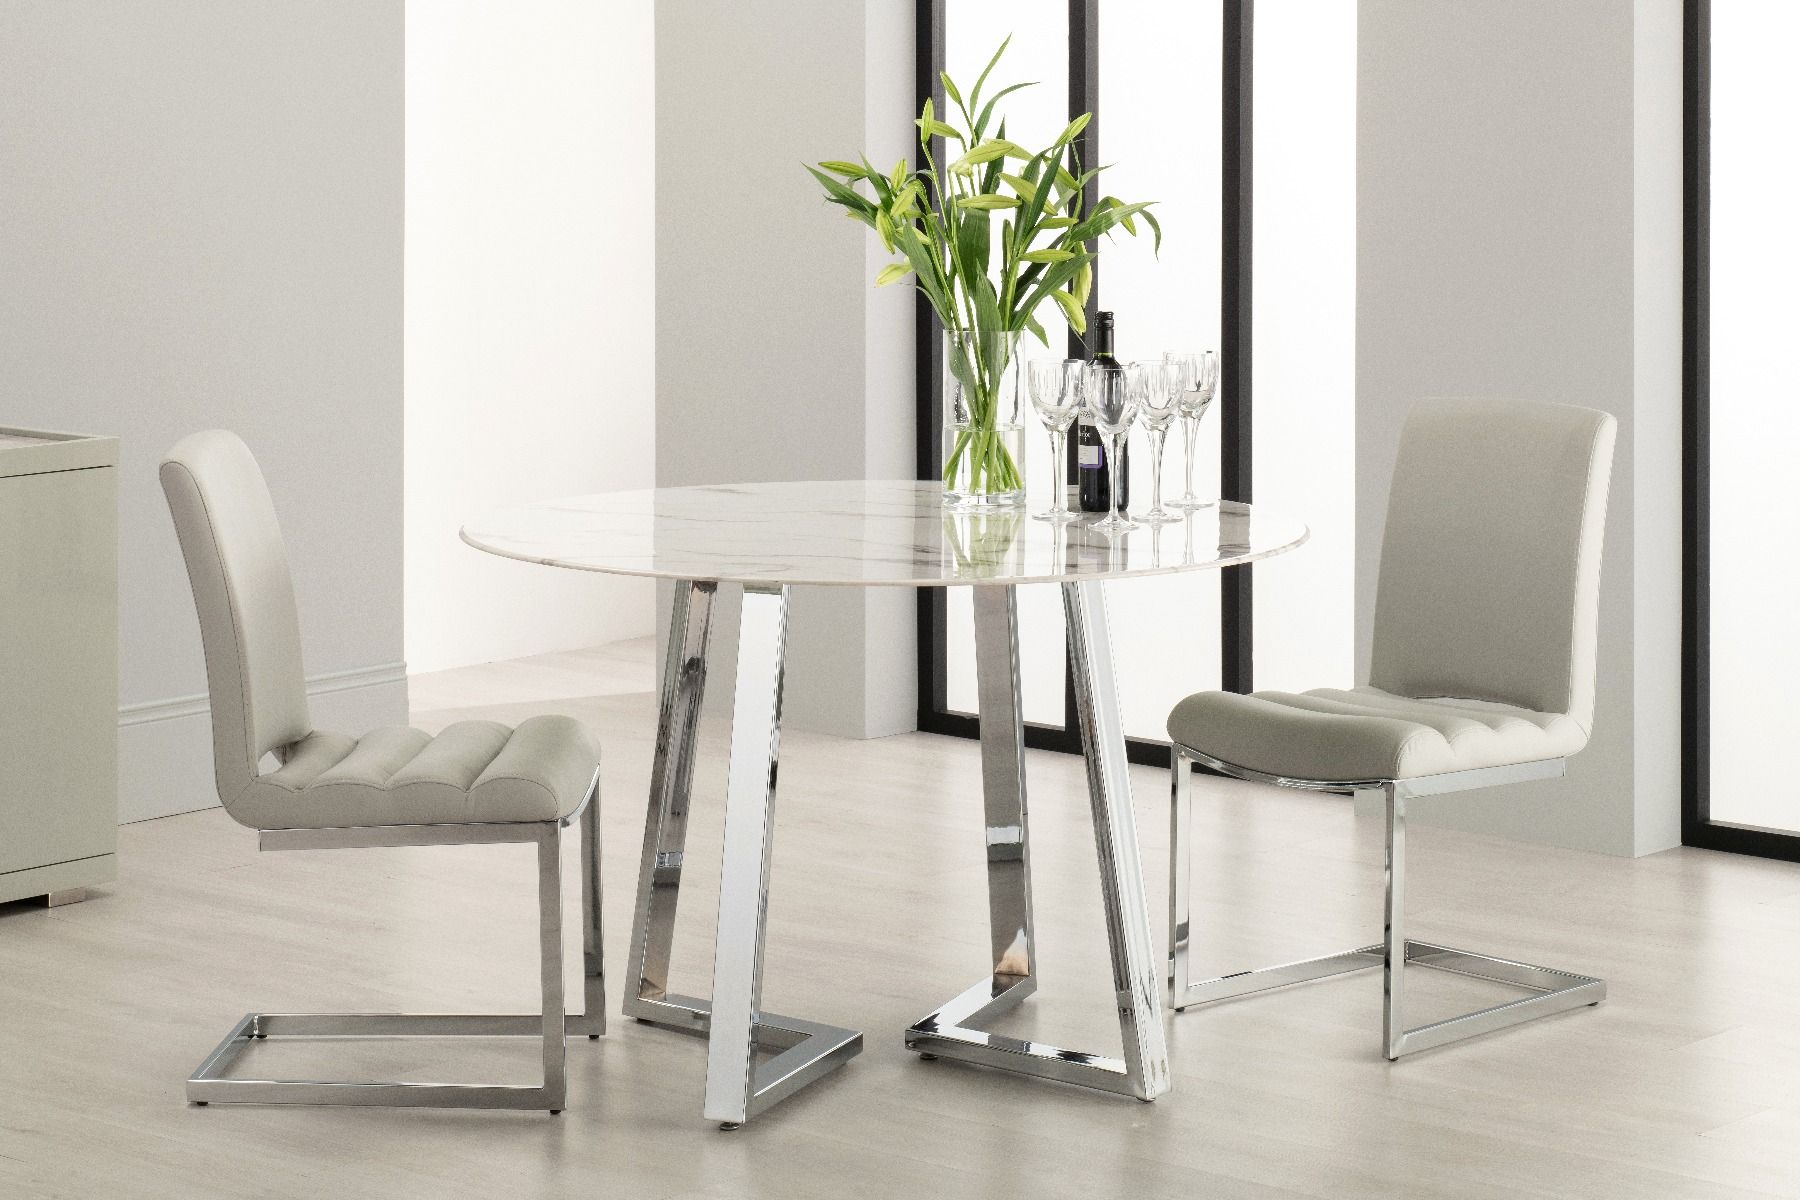 Storm Round Dining Table